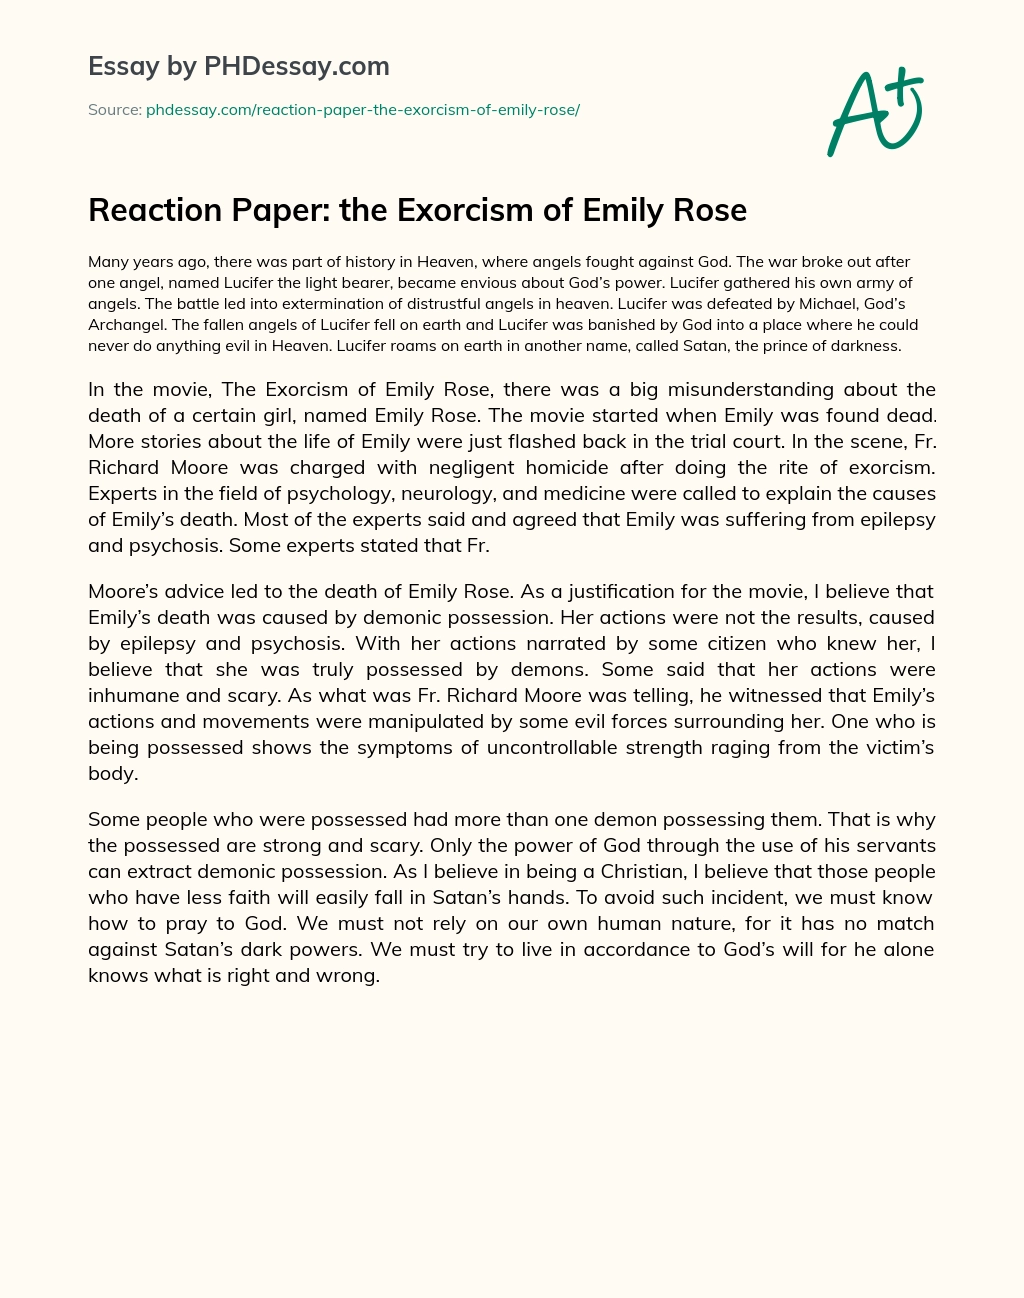 Reaction Paper: the Exorcism of Emily Rose essay